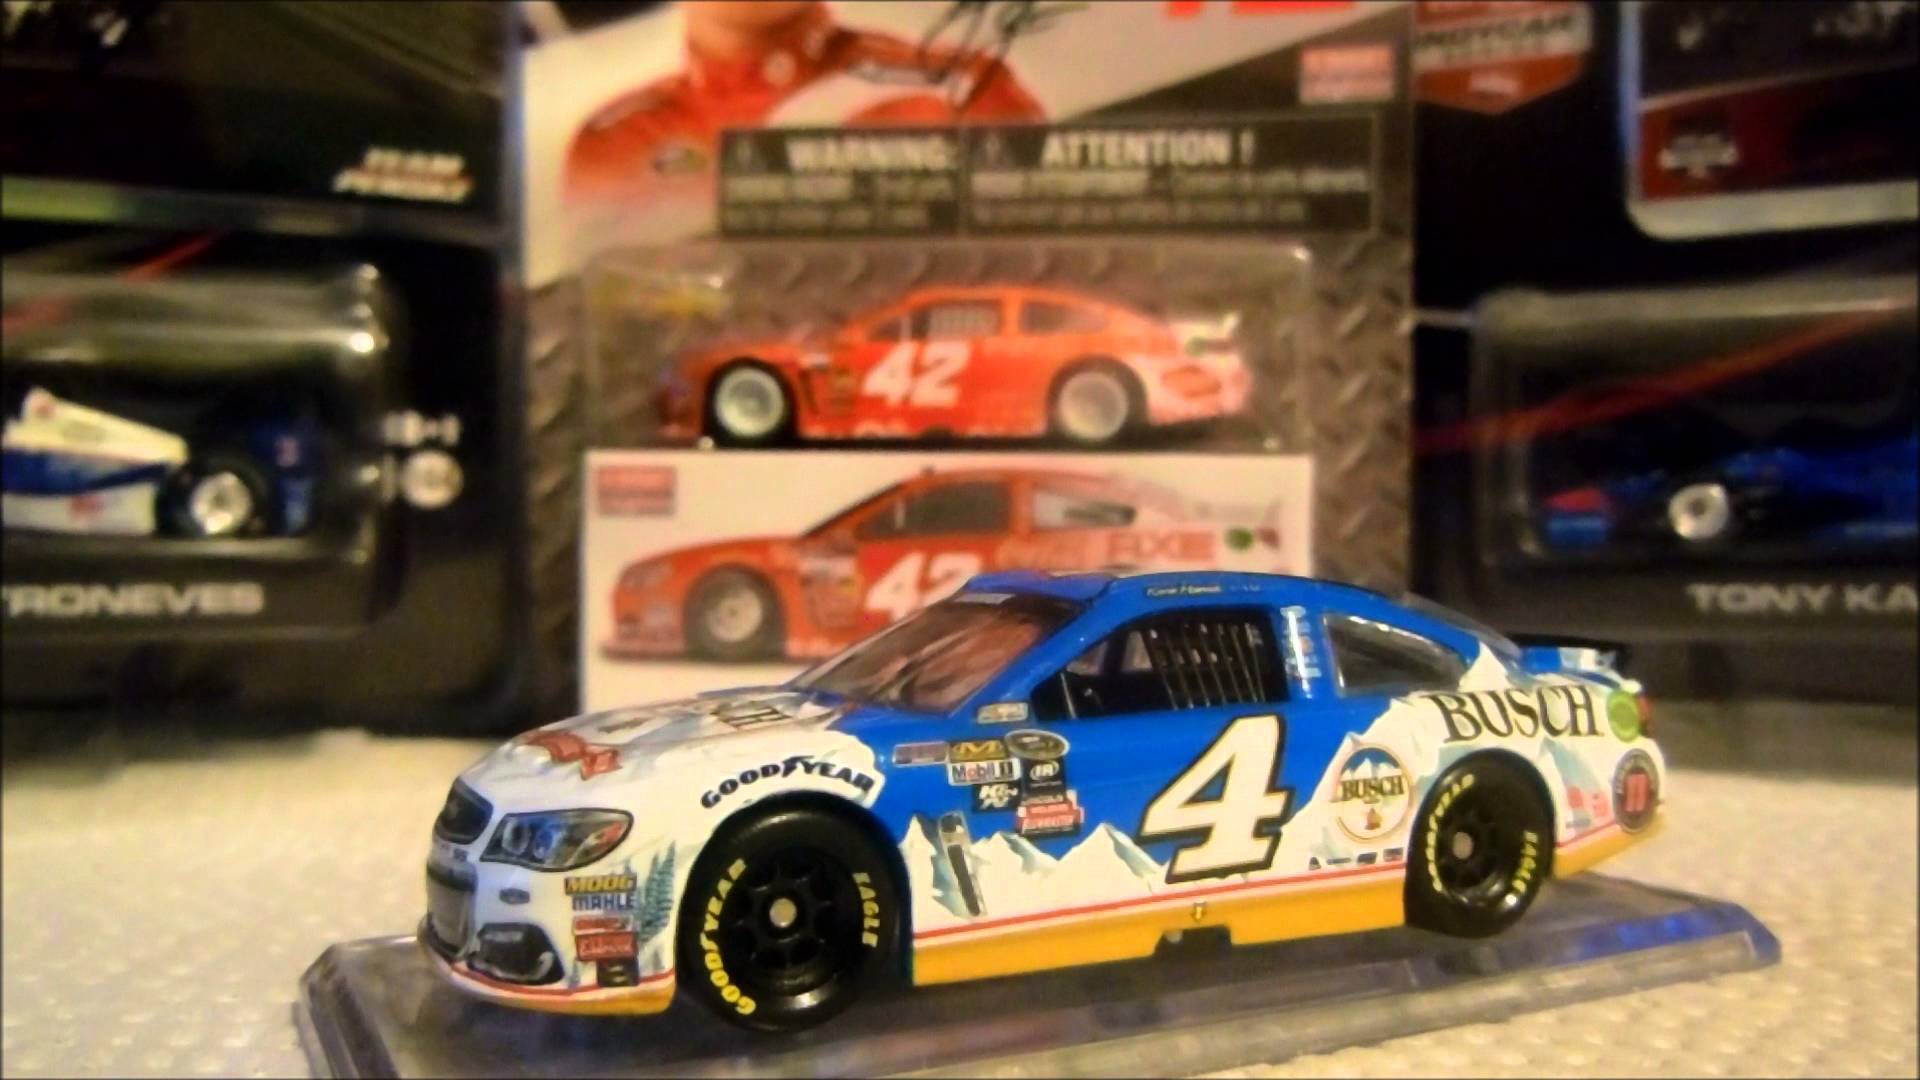 NASCAR Diecast Review on Kevin Harvick&2016 Busch Beer Chevy